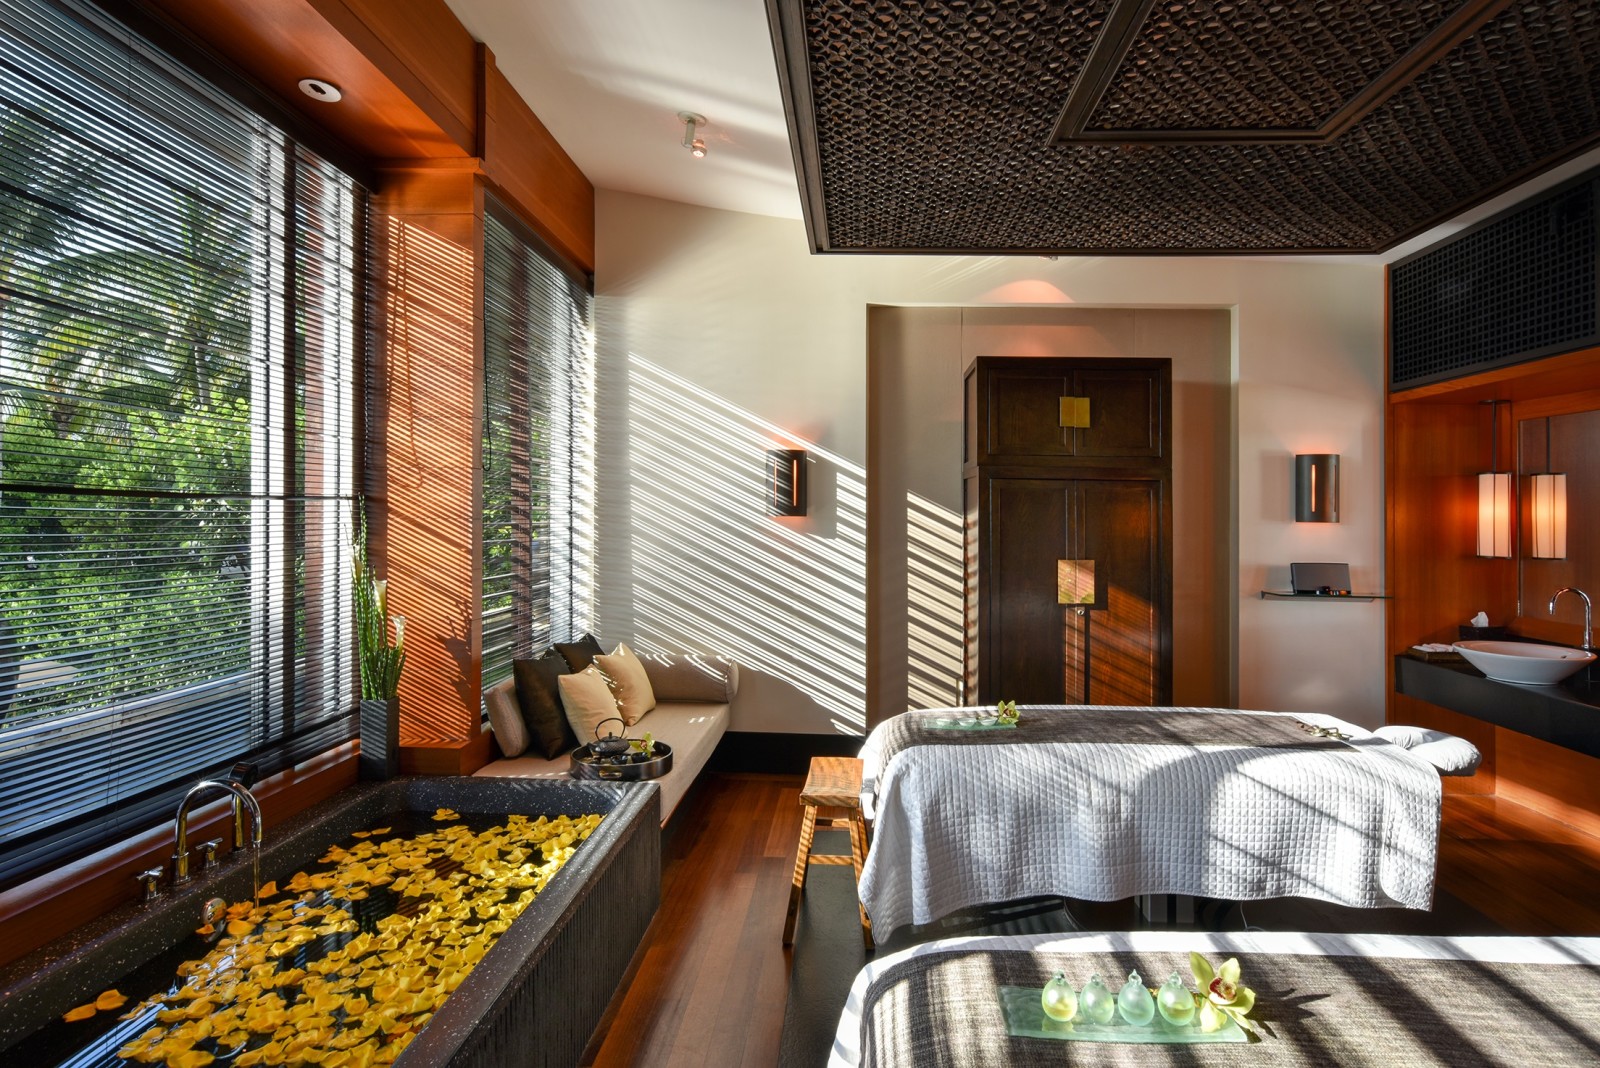 Marketing Suite :: Valmont Spa For Plaza Athenee - New York, NY